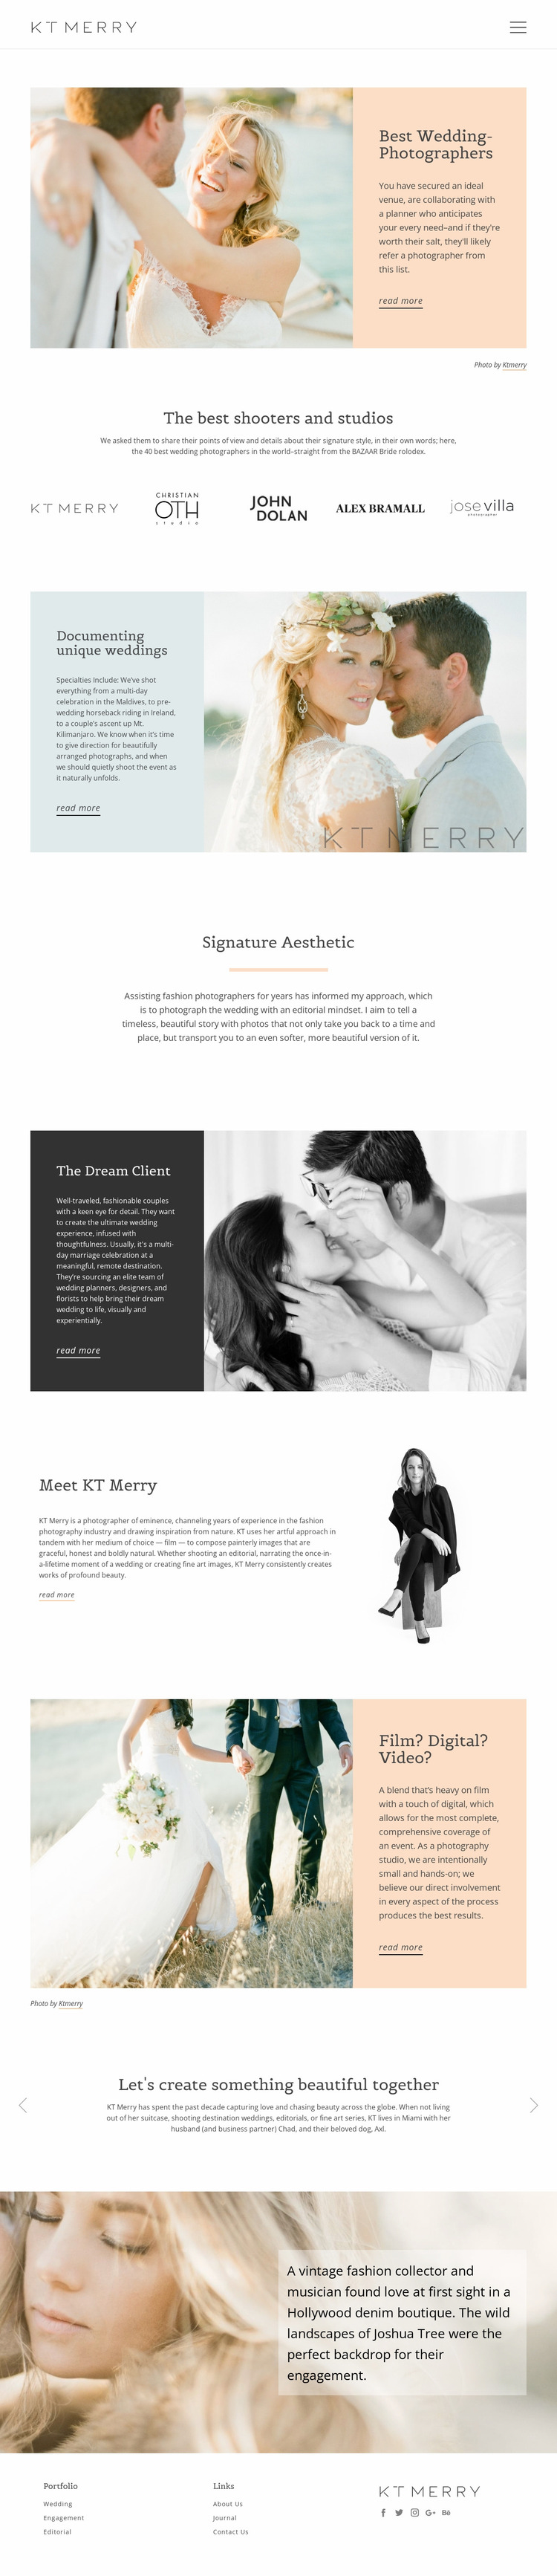 Shooters for special wedding Website Mockup